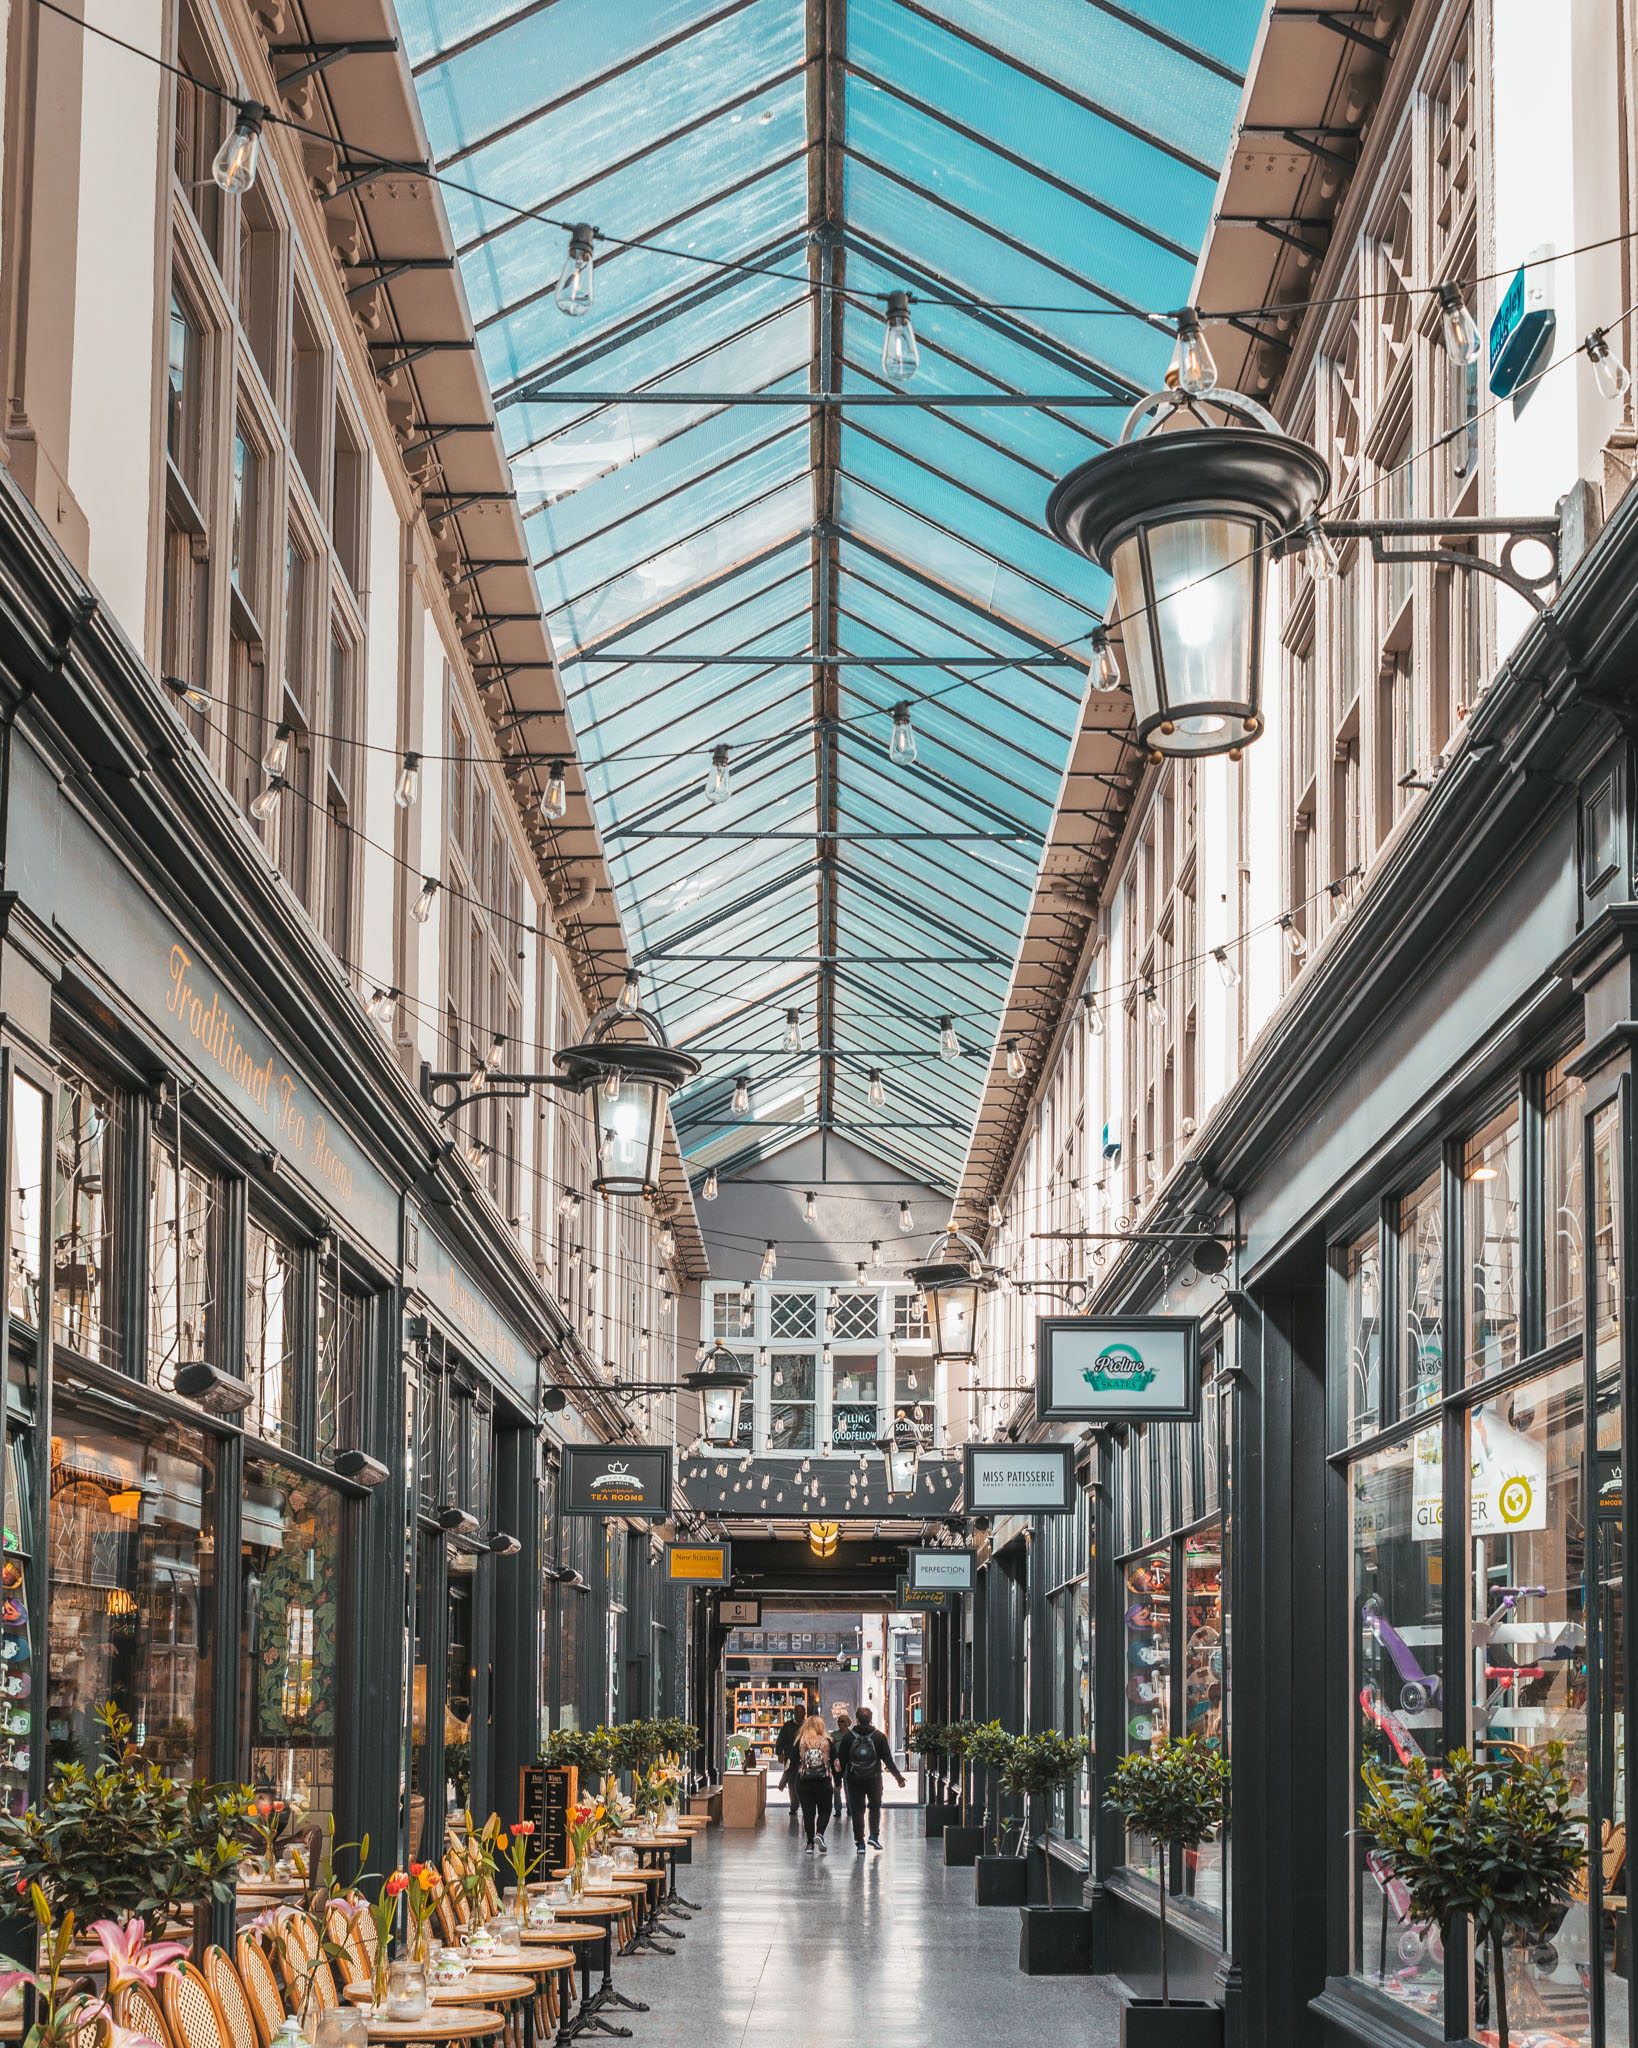 Cardiff arcade // The Most Beautiful Places to Visit in Wales // #readysetjetset #wales #uk #welsh #travel #photospots #blogpost